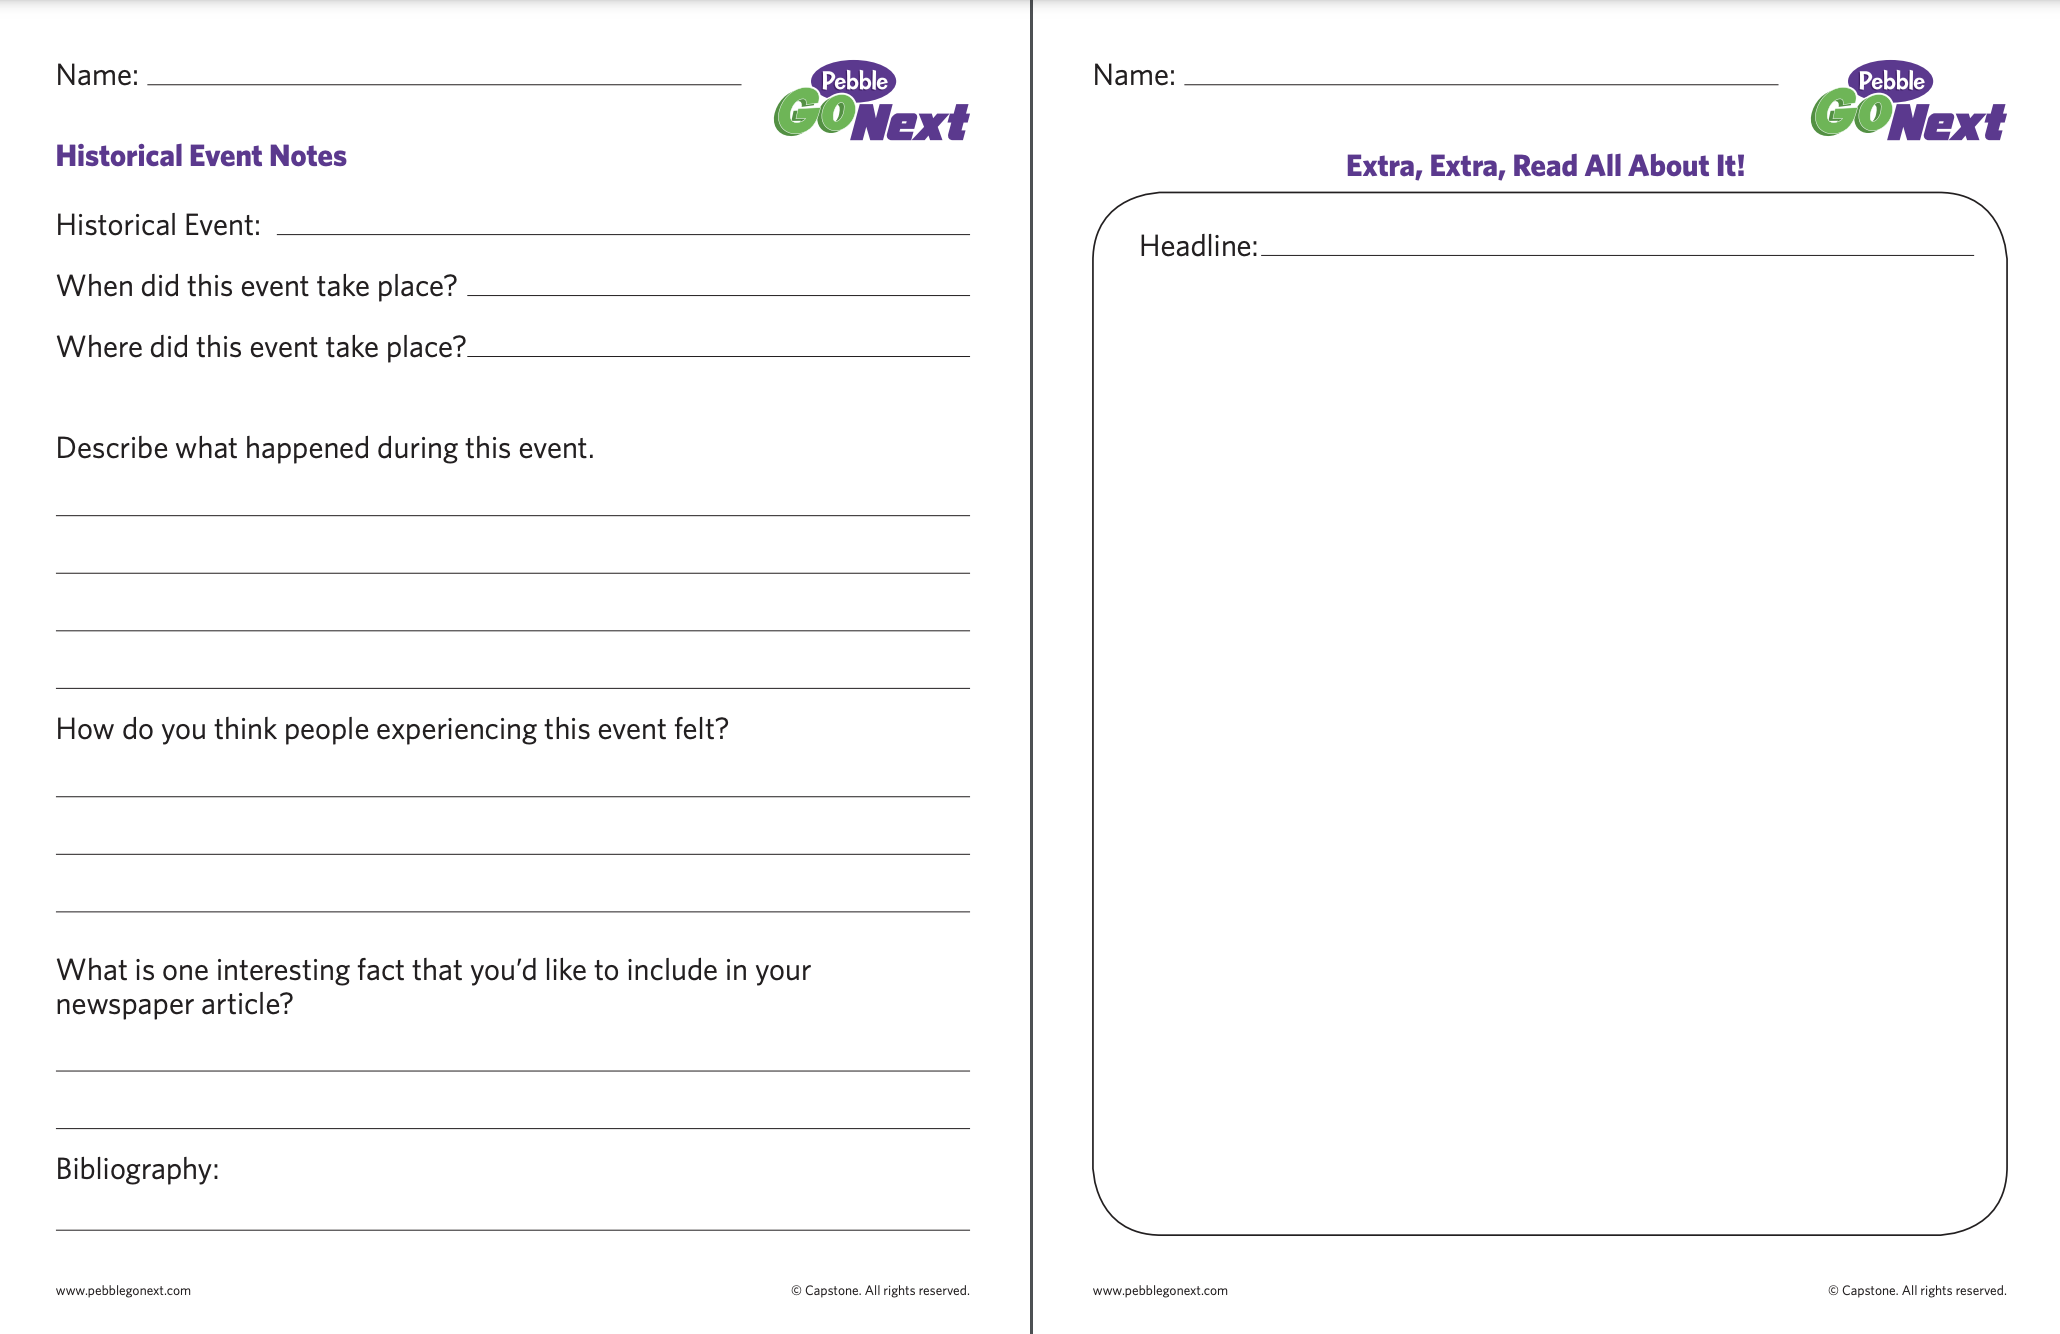 Guided questions and historical events template.